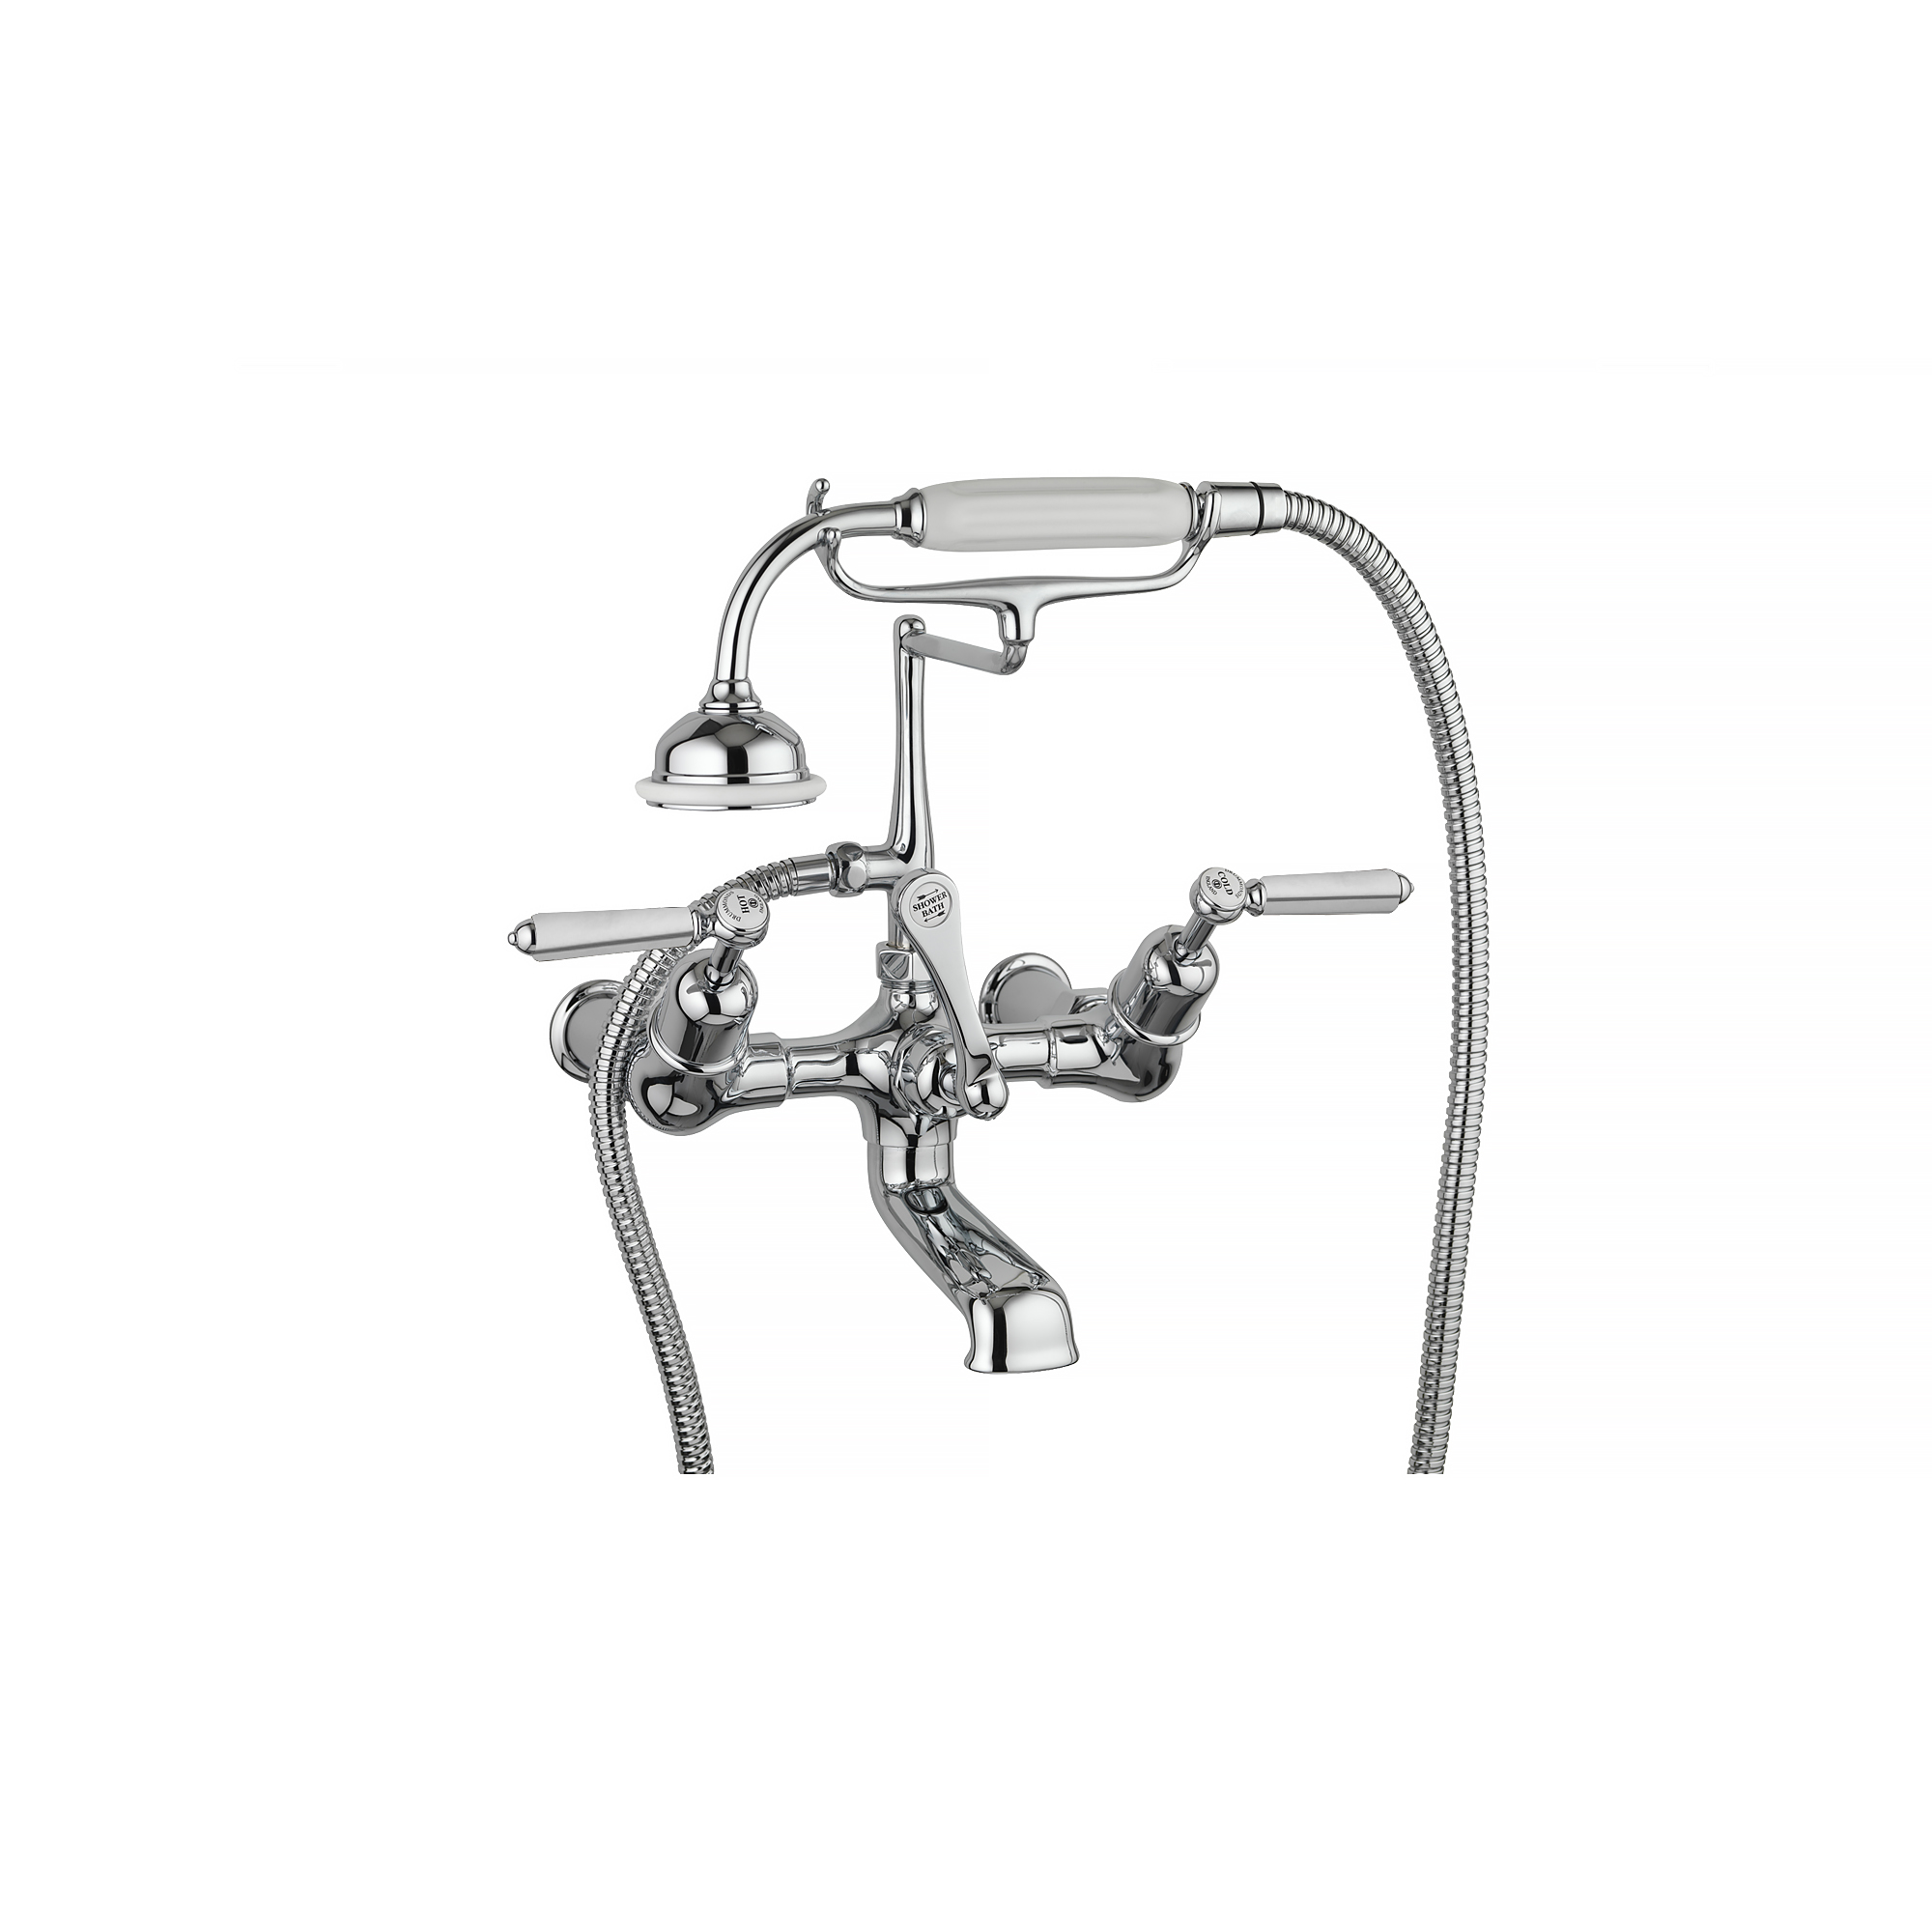 The Coll Classic Wall Mounted Bath & Shower Mixer with china handles in chrome finish